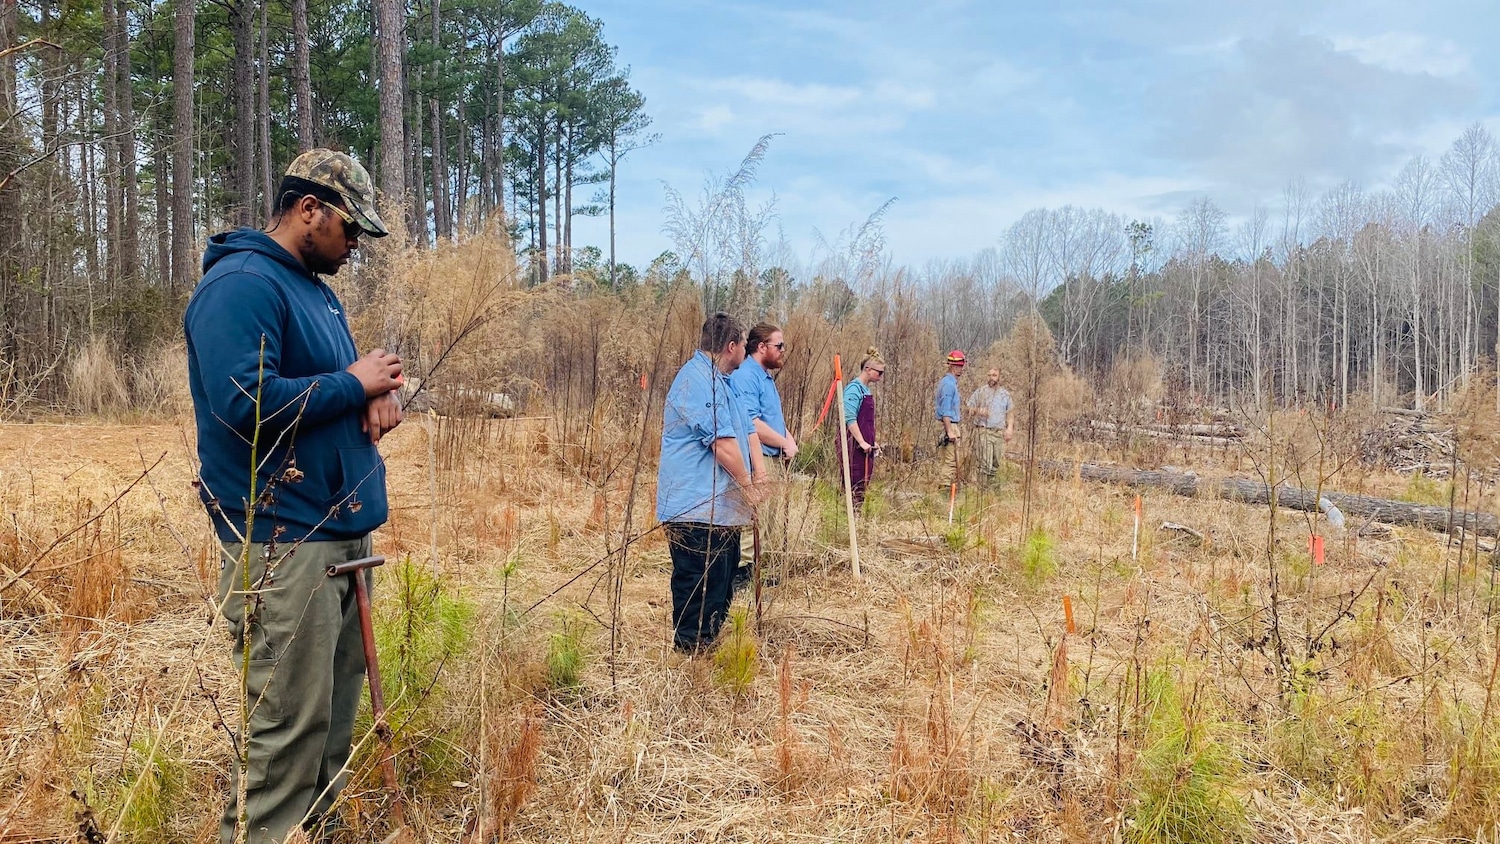 Students lined up to plant Loblolly Pine seedling at Schenck Forest.